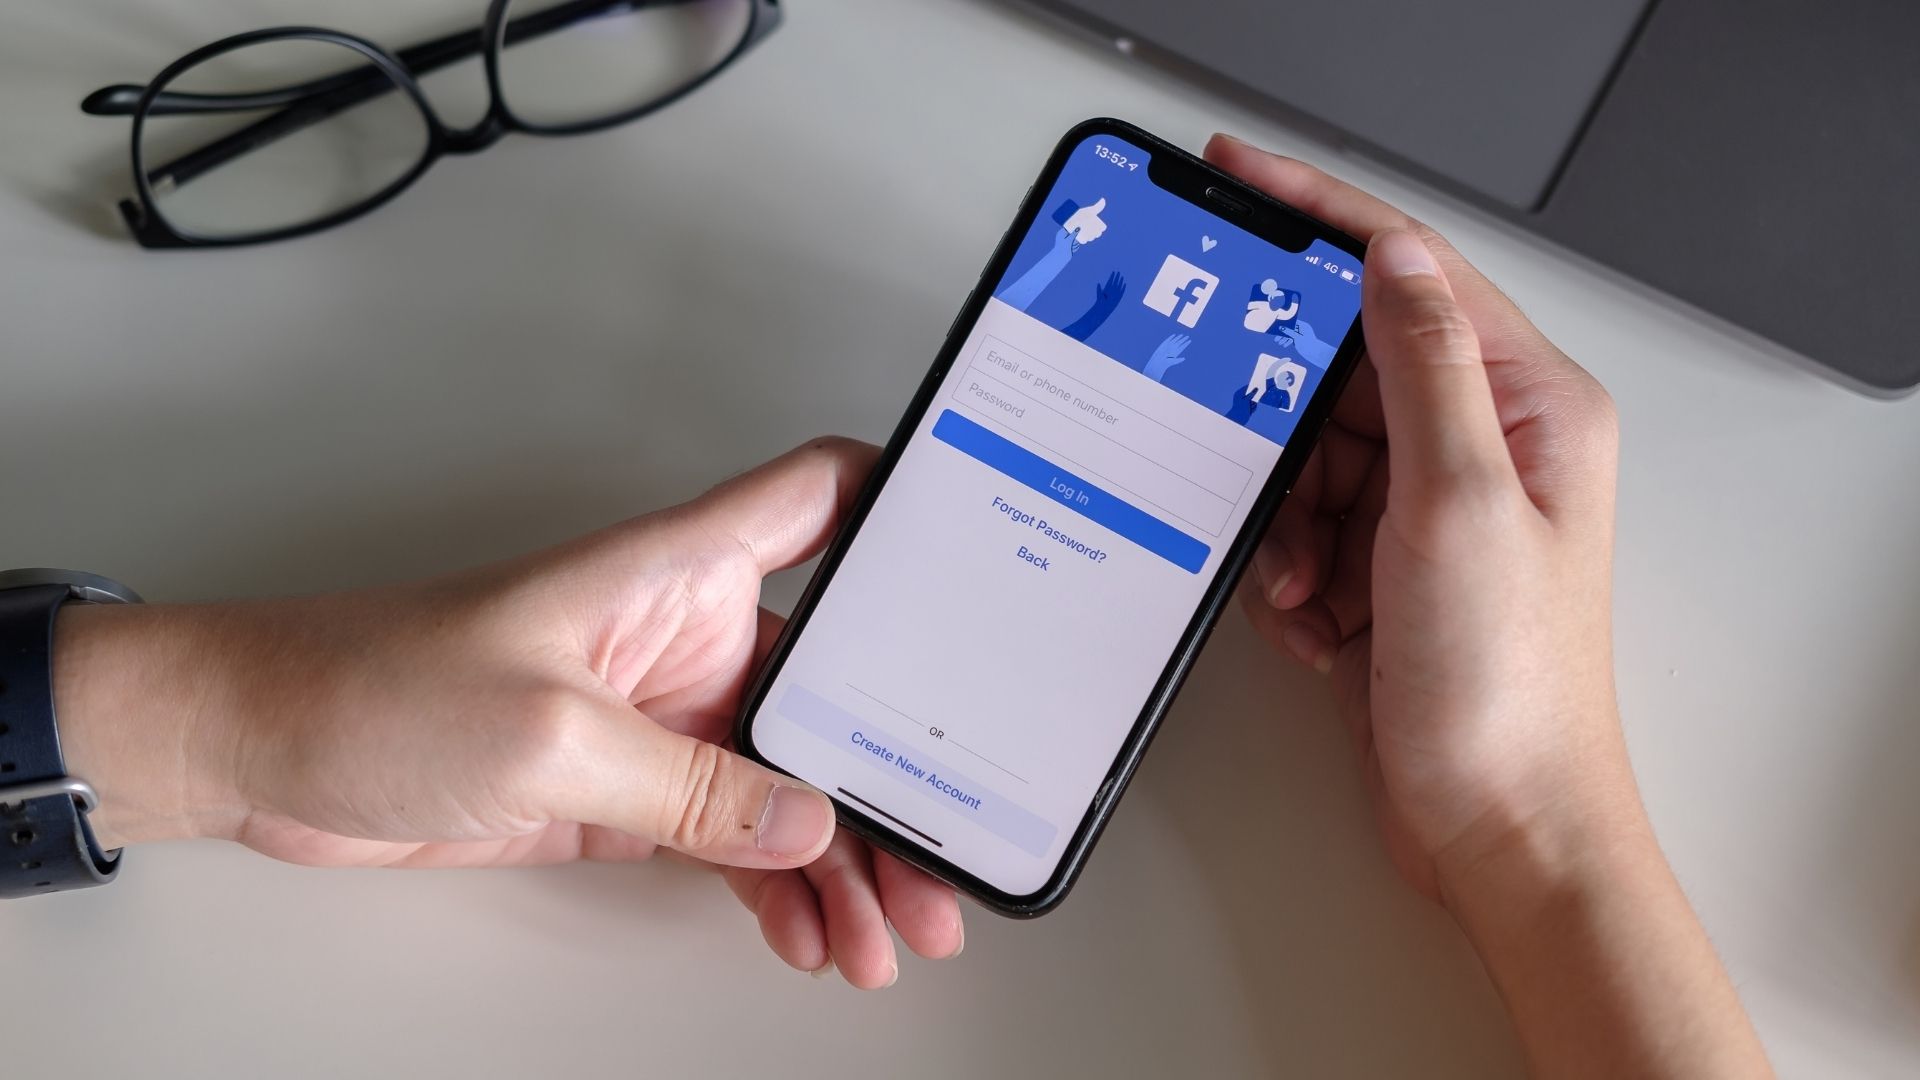 Facebook also enables users to find others' accounts using their phone numbers